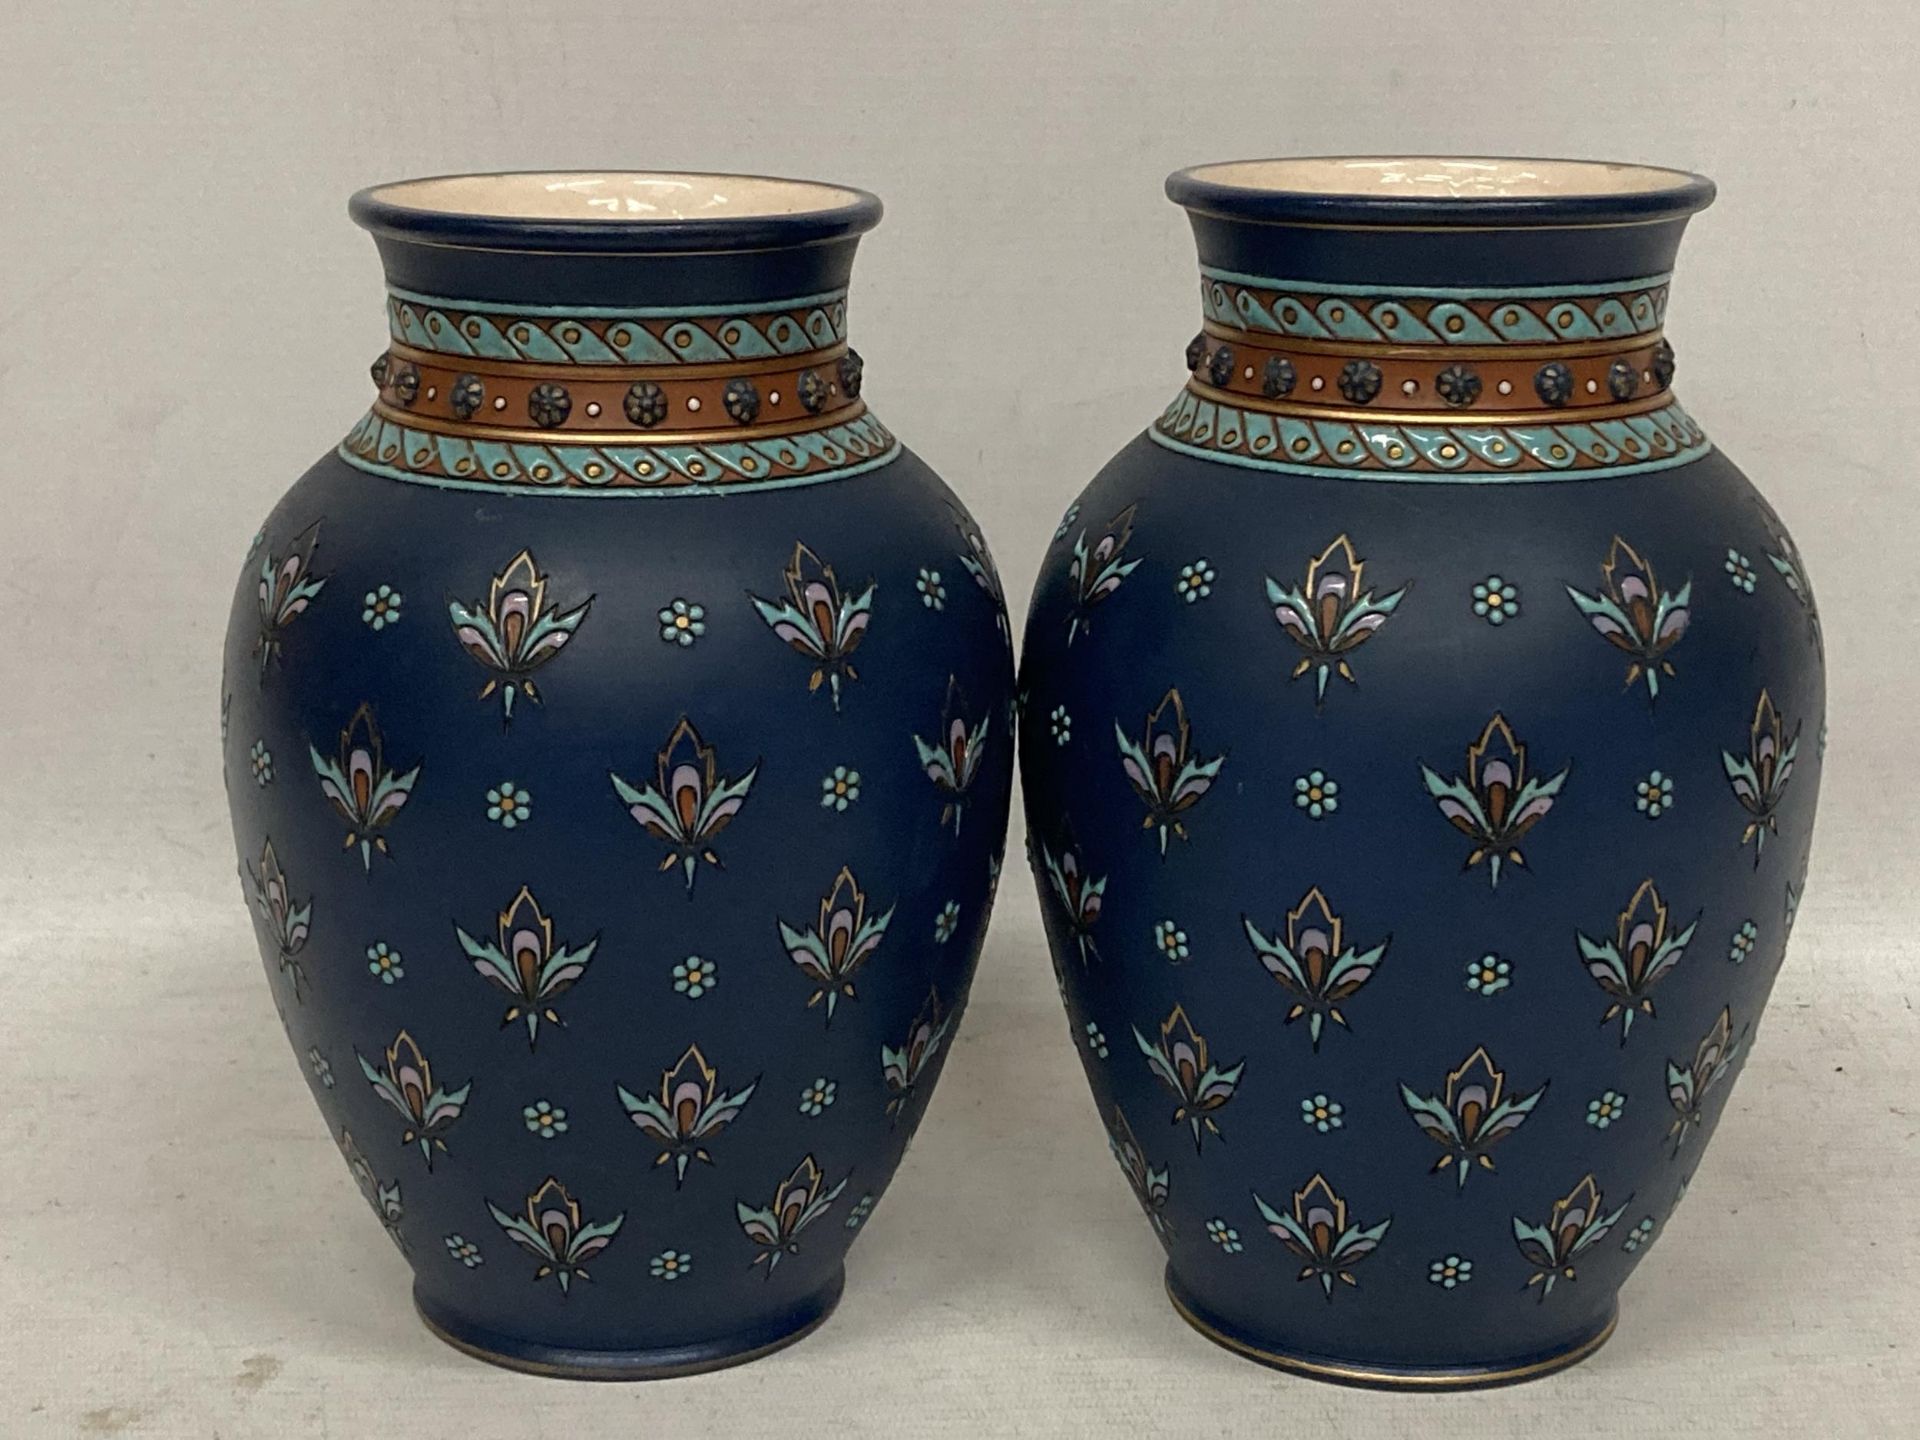 A PAIR OF METTLACH FLORAL DESIGN VASES, STAMPED 1875 TO BASE